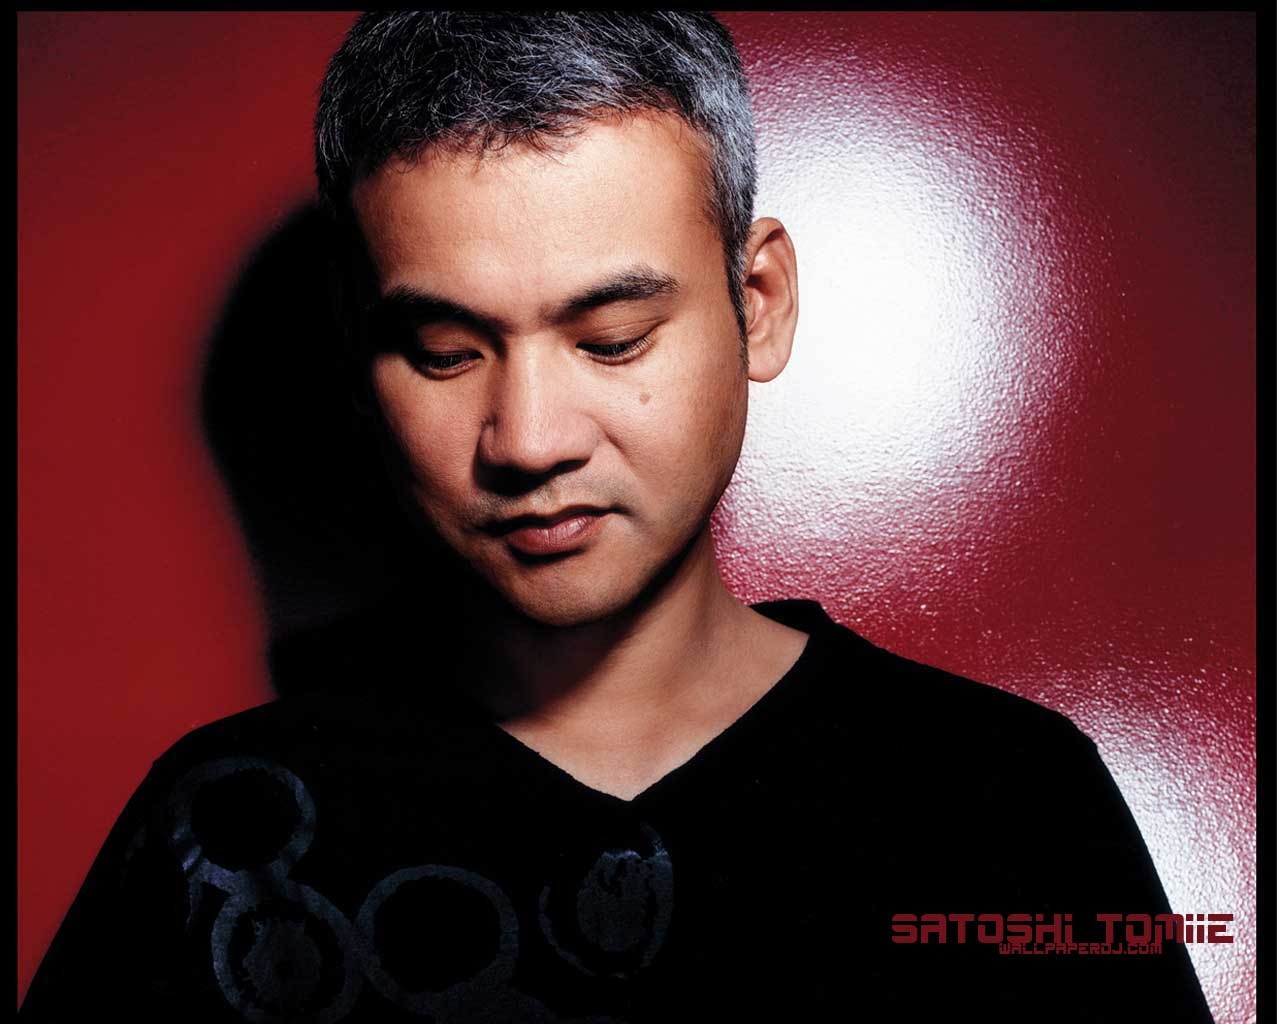 Satoshi Tomiie HD and Wide Wallpapers